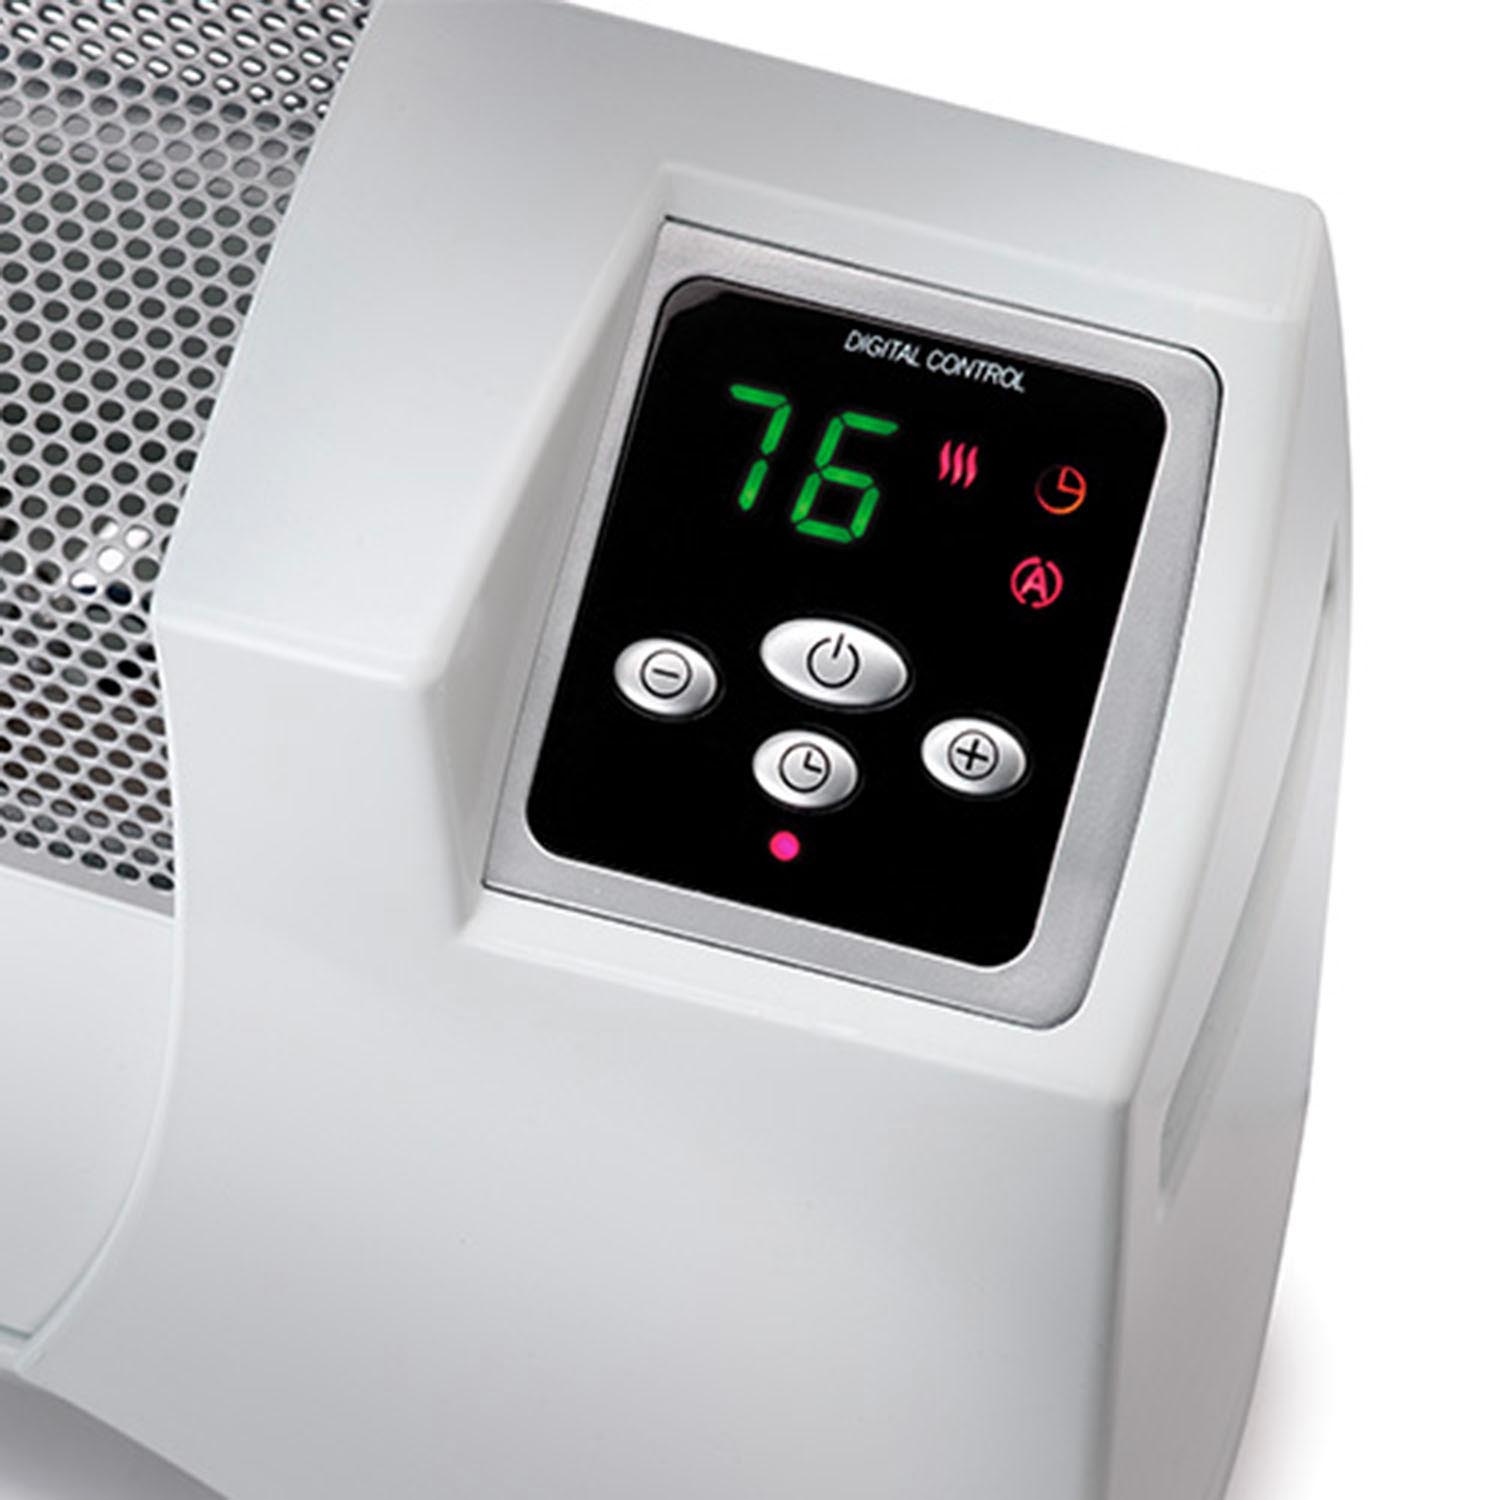 Lasko Silent Heater with Digital Display, White - image 5 of 5